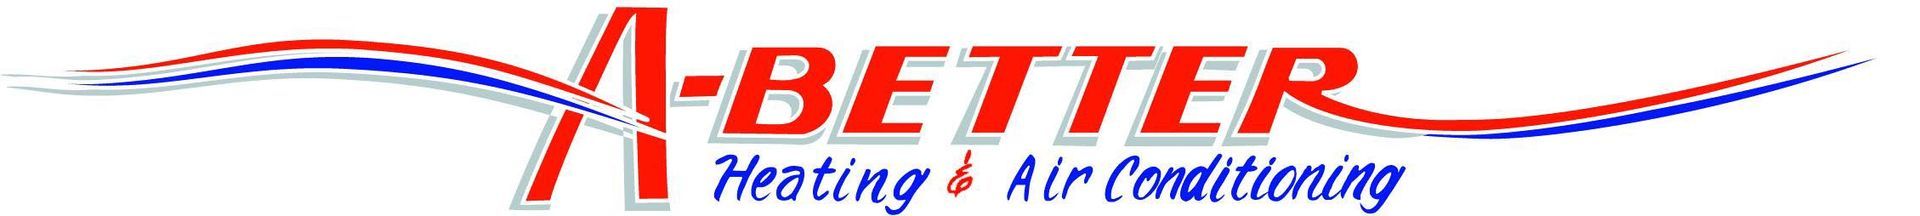 A-Better Heating & Air Conditioning